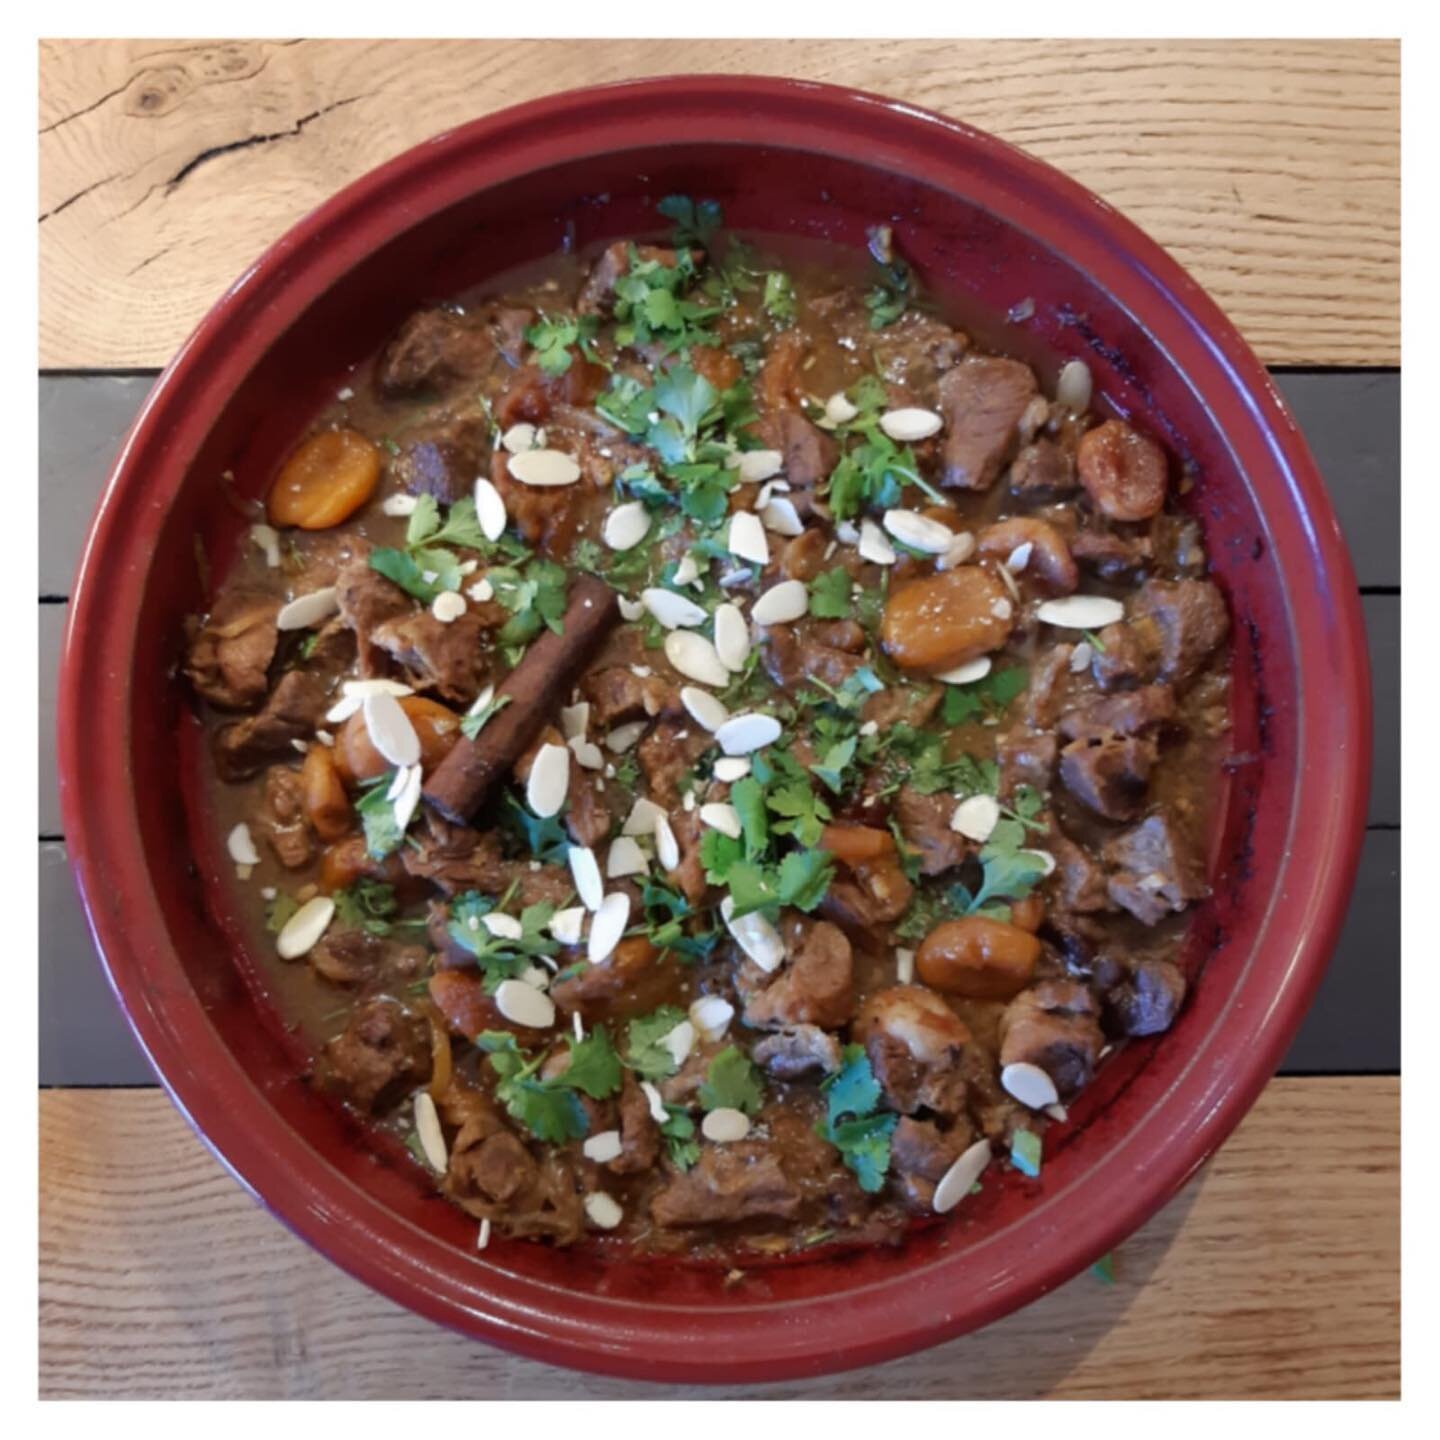 Our delivery special this week: lamb and apricot tagine, cooked looooong and slooooow.